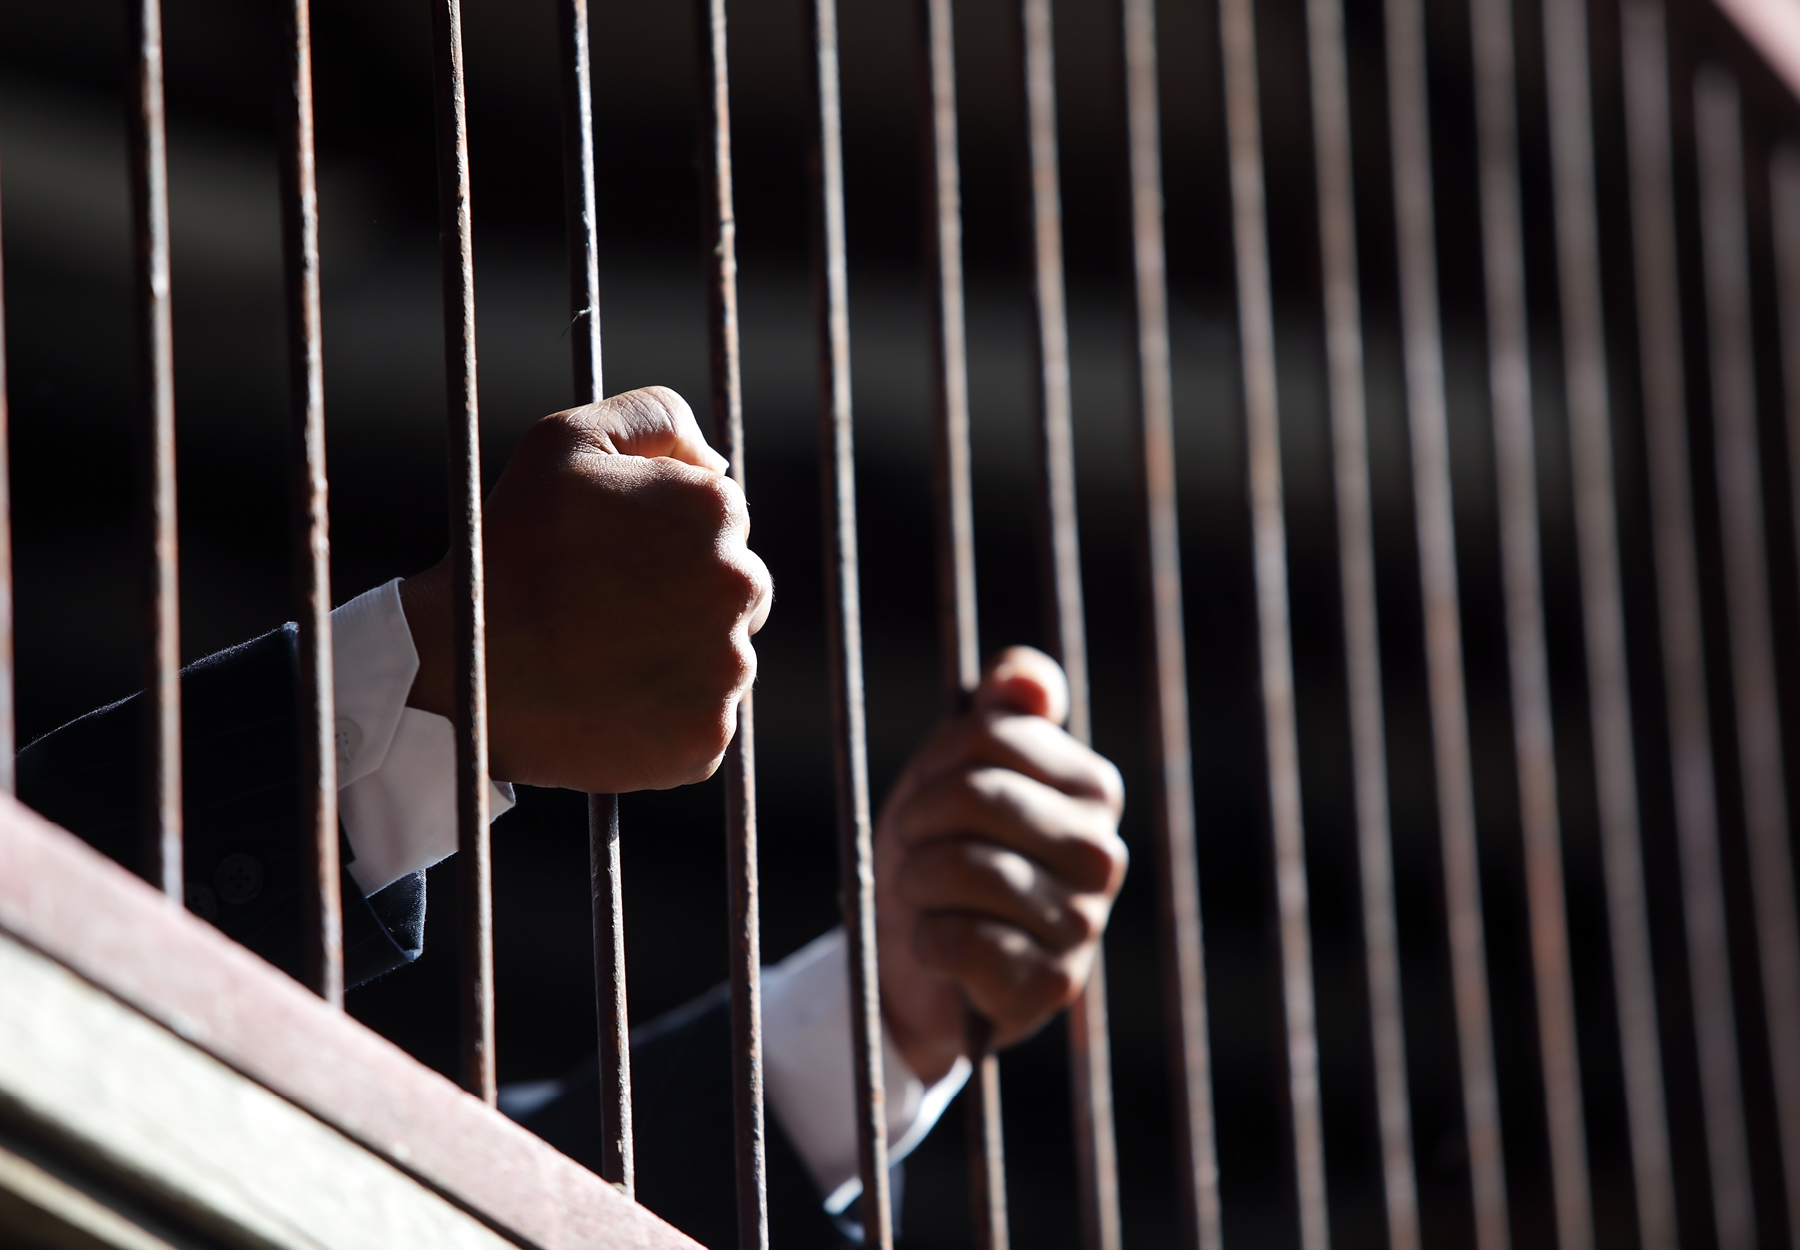 hands of businessman in jail. Stock image.